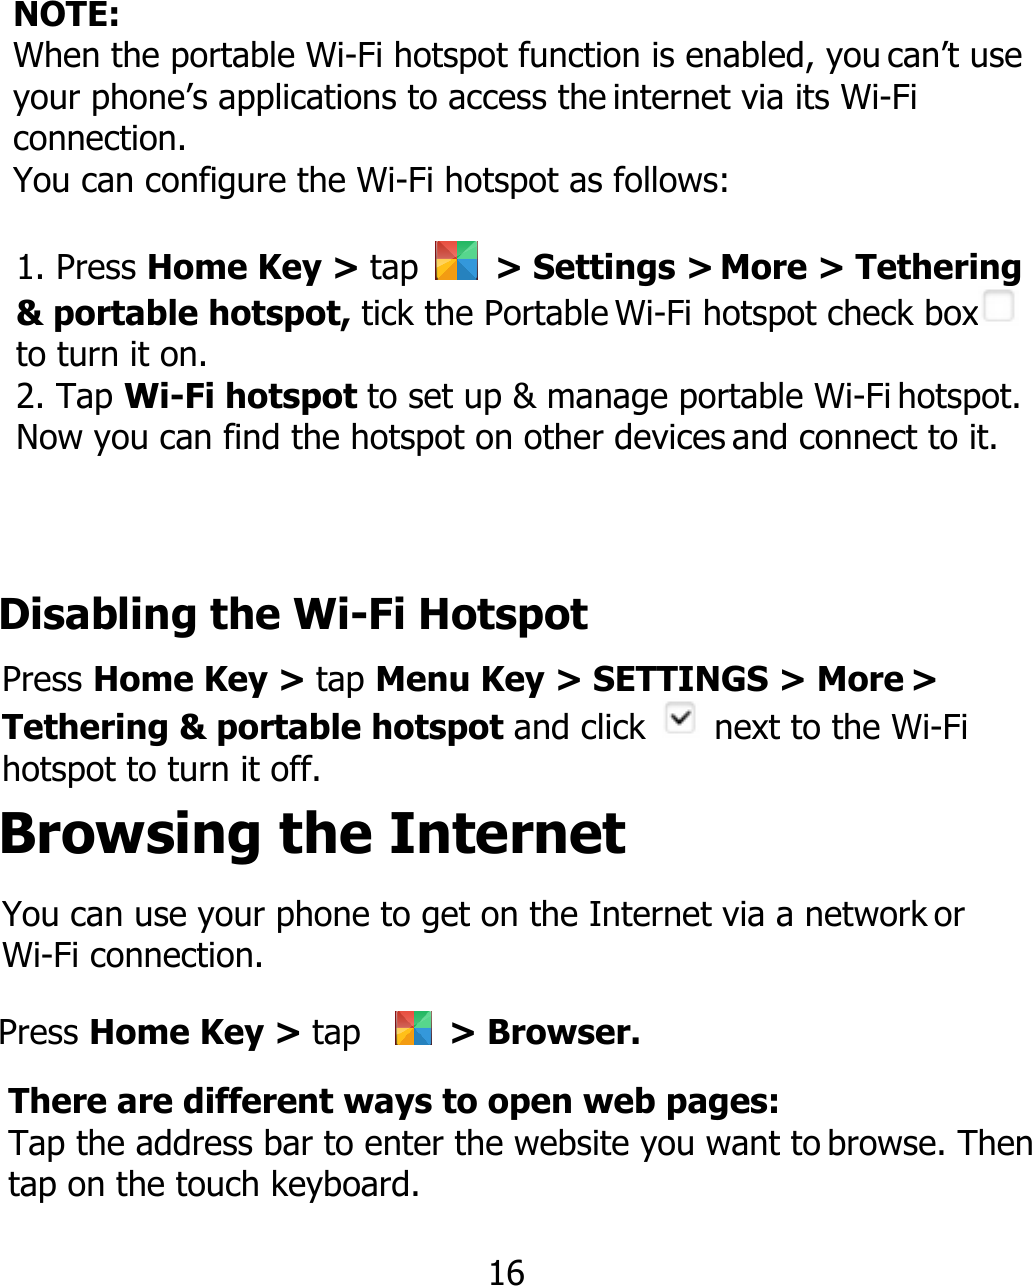 NOTE: When the portable Wi-Fi hotspot function is enabled, you can’t use your phone’s applications to access the internet via its Wi-Fi connection. You can configure the Wi-Fi hotspot as follows: 1. Press Home Key &gt; tap  &gt; Settings &gt; More &gt; Tethering &amp; portable hotspot, tick the Portable Wi-Fi hotspot check box  to turn it on. 2. Tap Wi-Fi hotspot to set up &amp; manage portable Wi-Fi hotspot. Now you can find the hotspot on other devices and connect to it. Disabling the Wi-Fi Hotspot Press Home Key &gt; tap Menu Key &gt; SETTINGS &gt; More &gt; Tethering &amp; portable hotspot and click   next to the Wi-Fi hotspot to turn it off. Browsing the Internet Press Home Key &gt; tap    &gt; Browser. You can use your phone to get on the Internet via a network or Wi-Fi connection. There are different ways to open web pages: Tap the address bar to enter the website you want to browse. Then tap on the touch keyboard. 16 